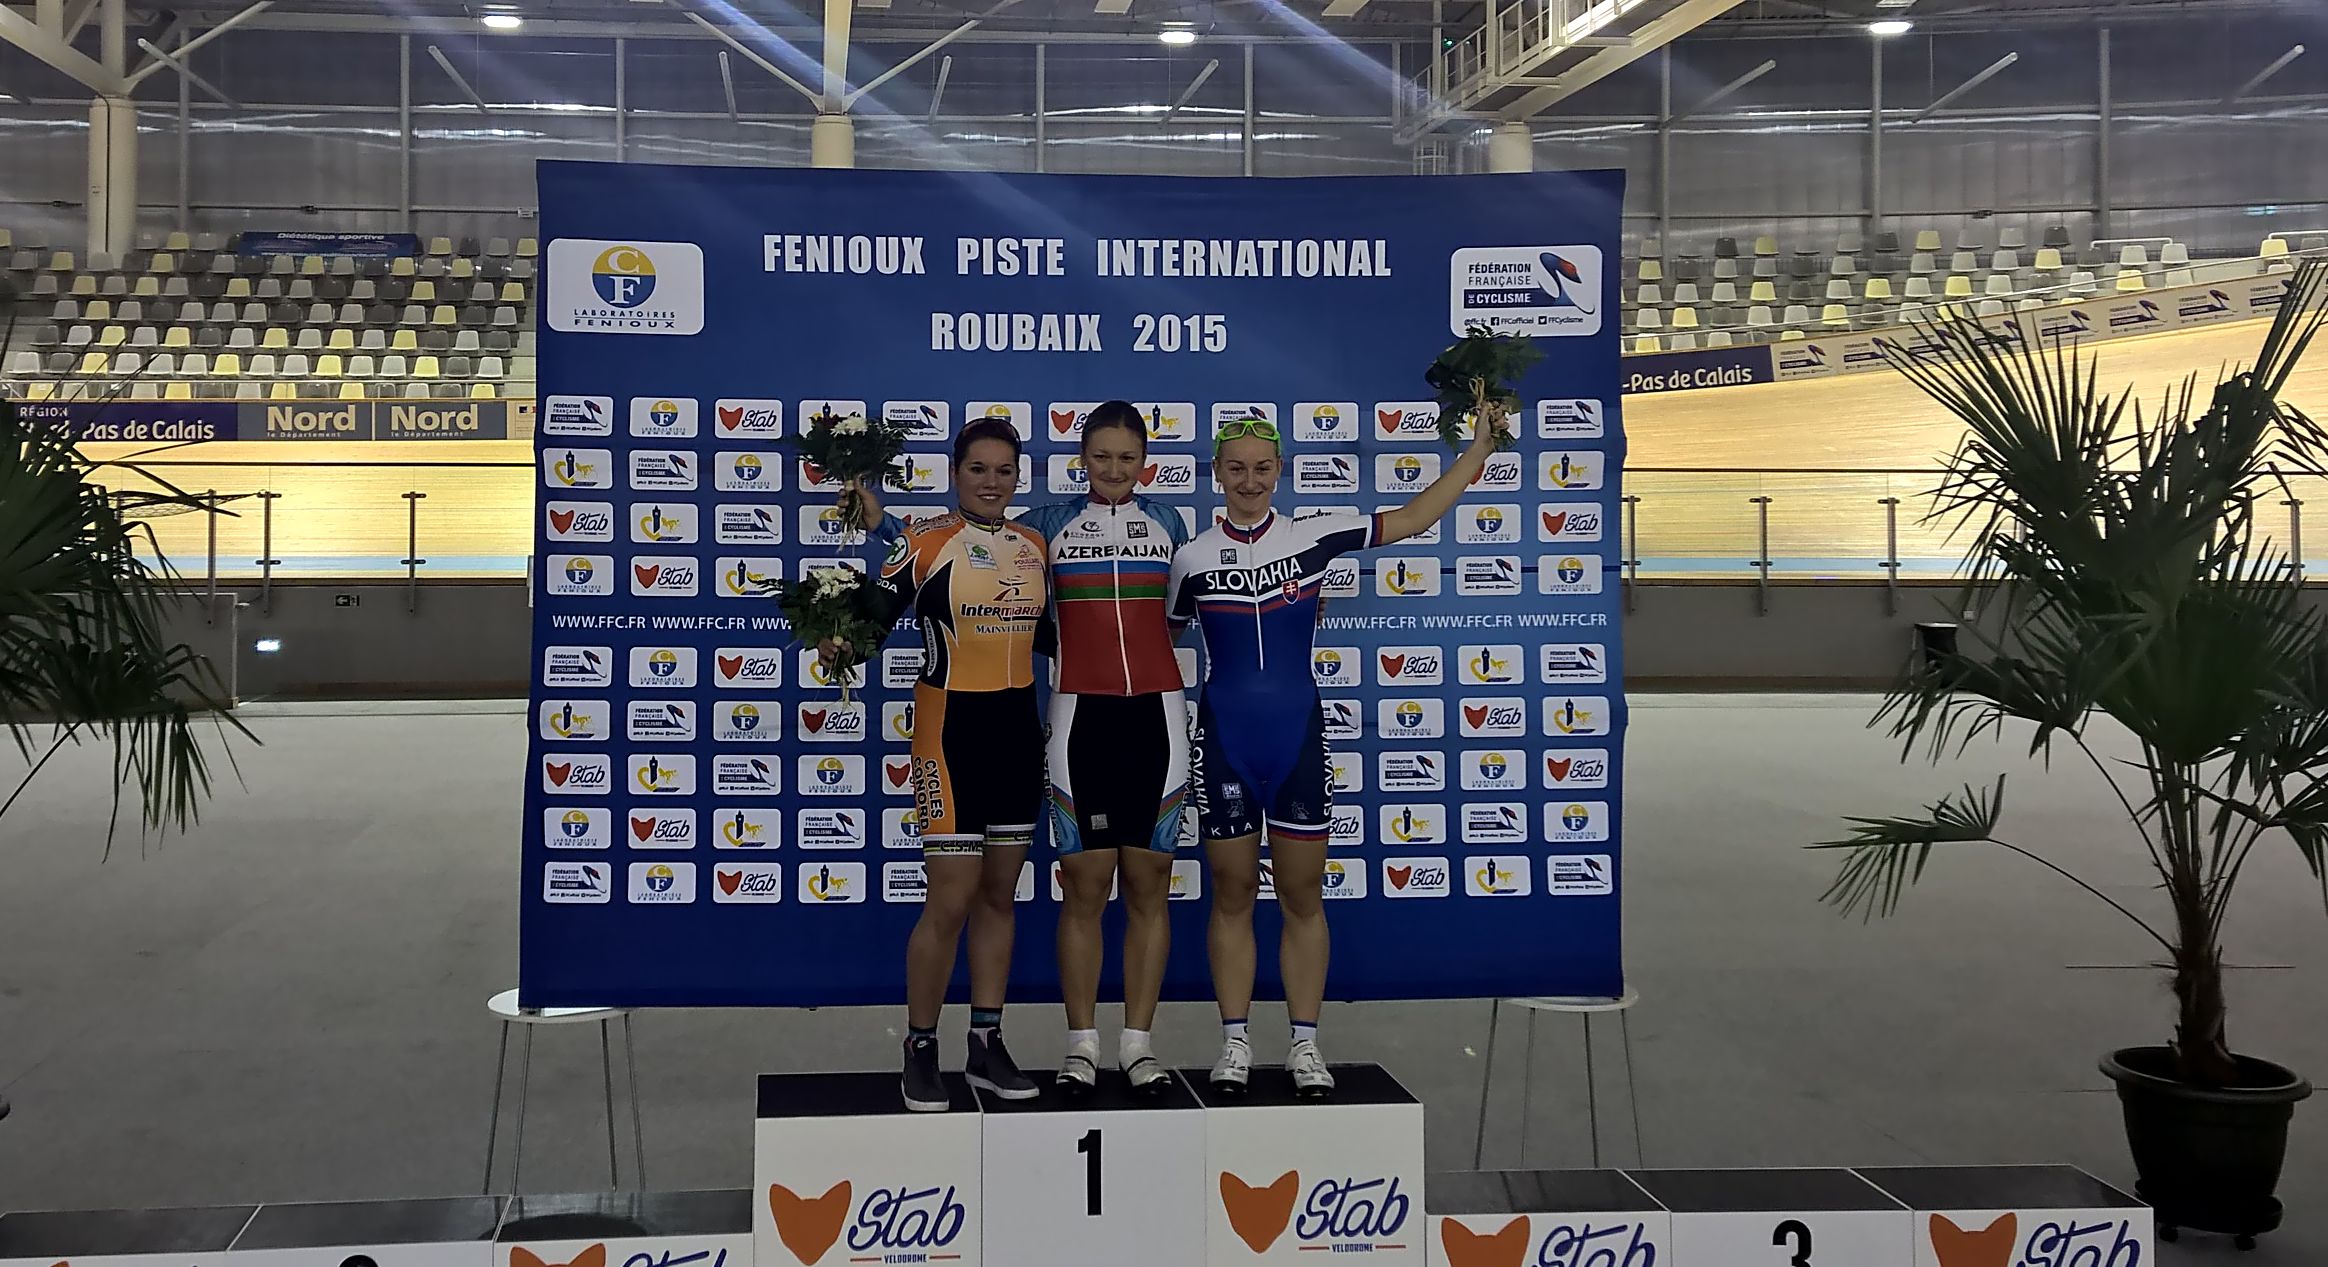 National cyclist wins second gold in France